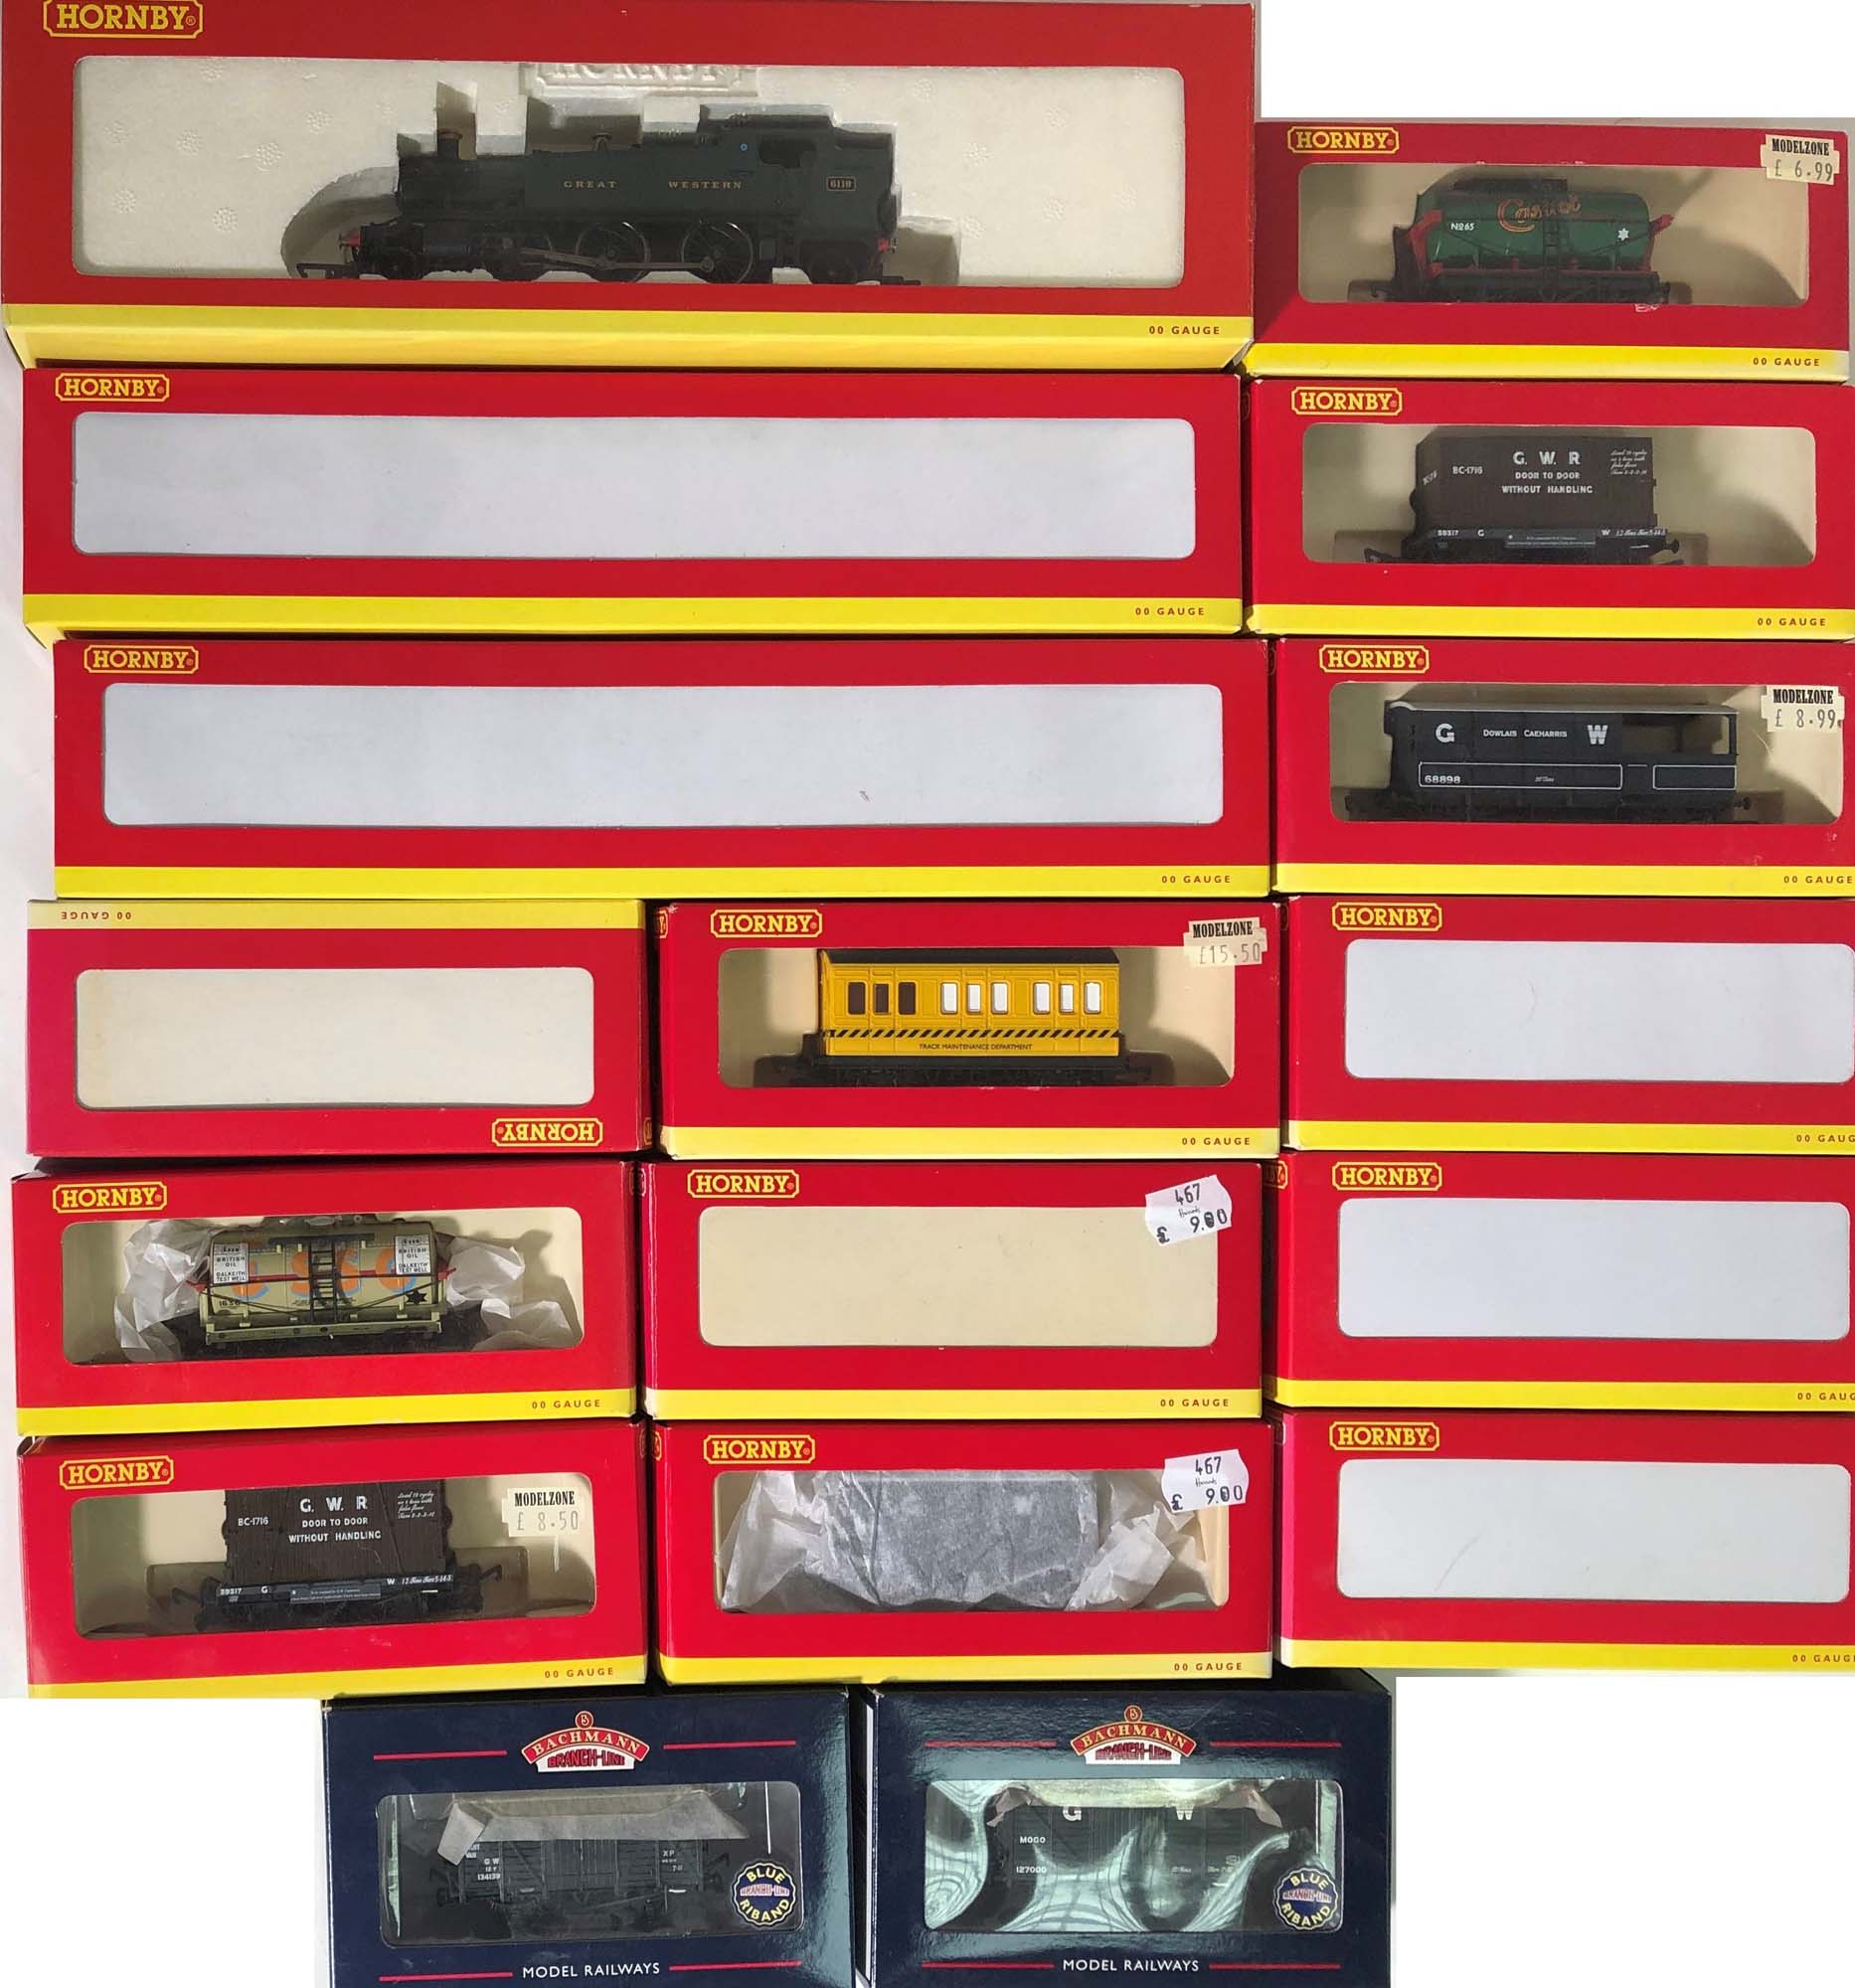 HORNBY TRAINS AND ACCESSORIES. A boxed Hornby ''00' gauge 2-6-2 tank locomotive No.